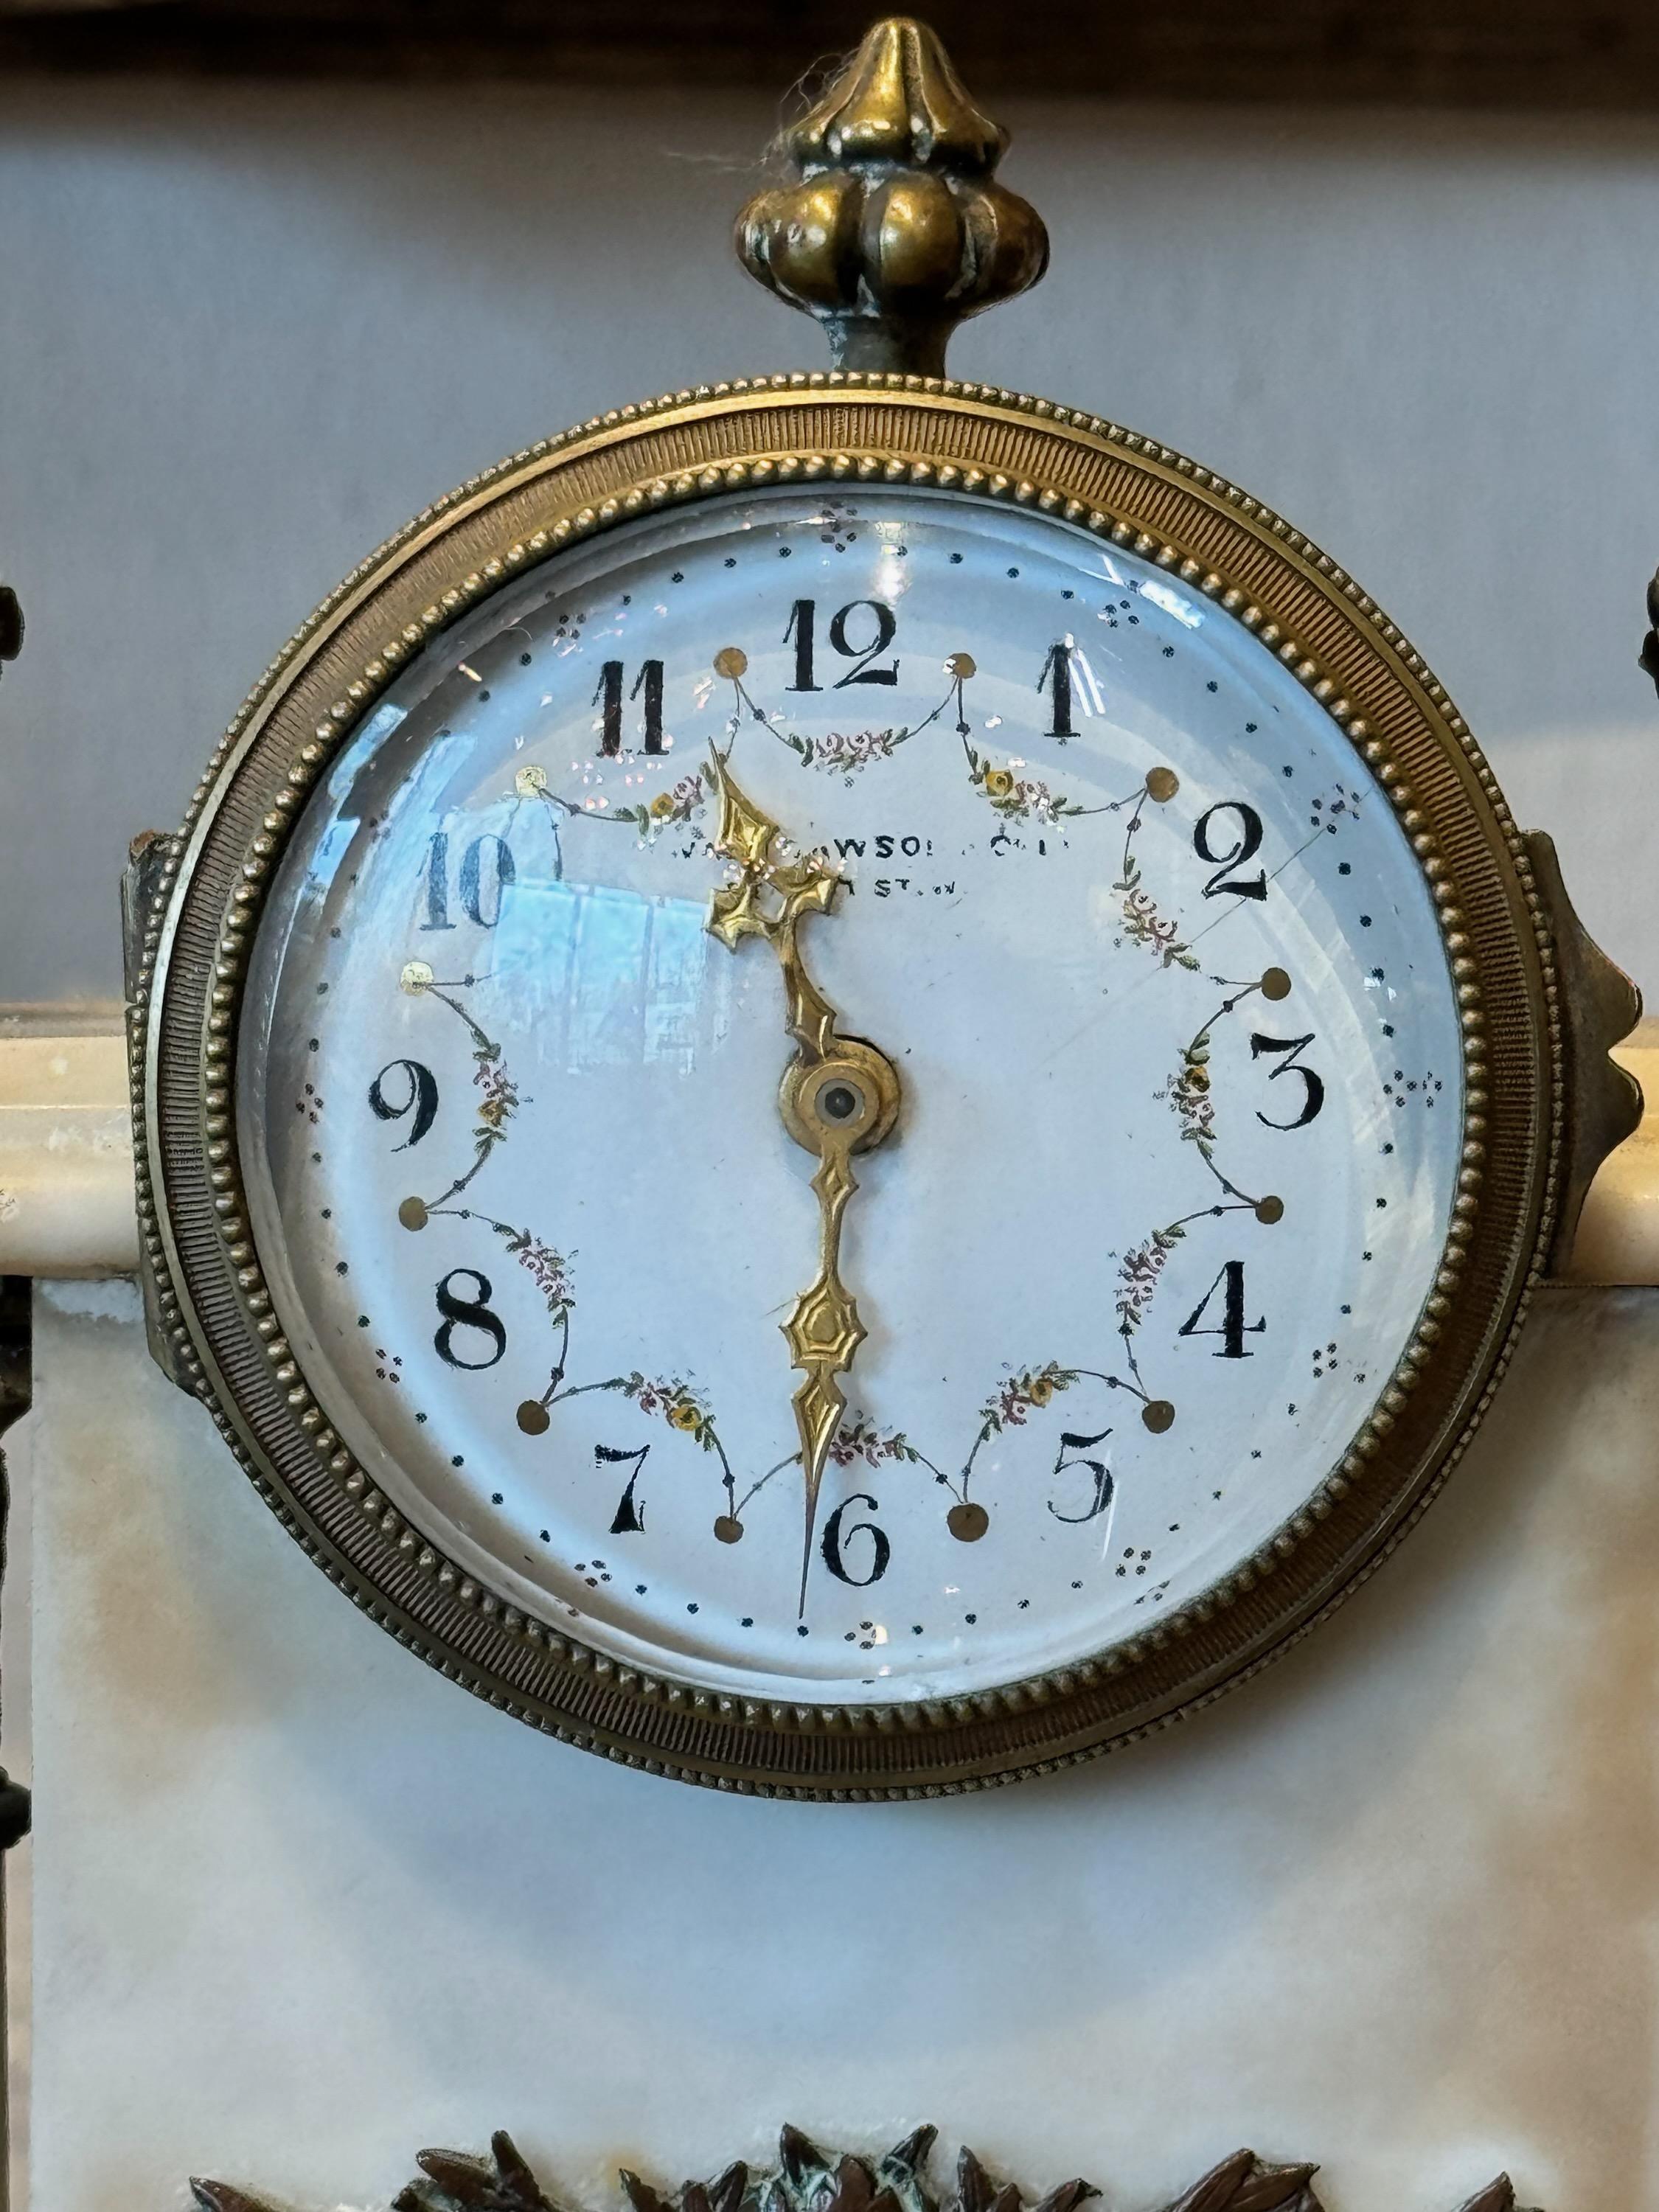 This sweet little French clock has lots of charm. It has great decoration.